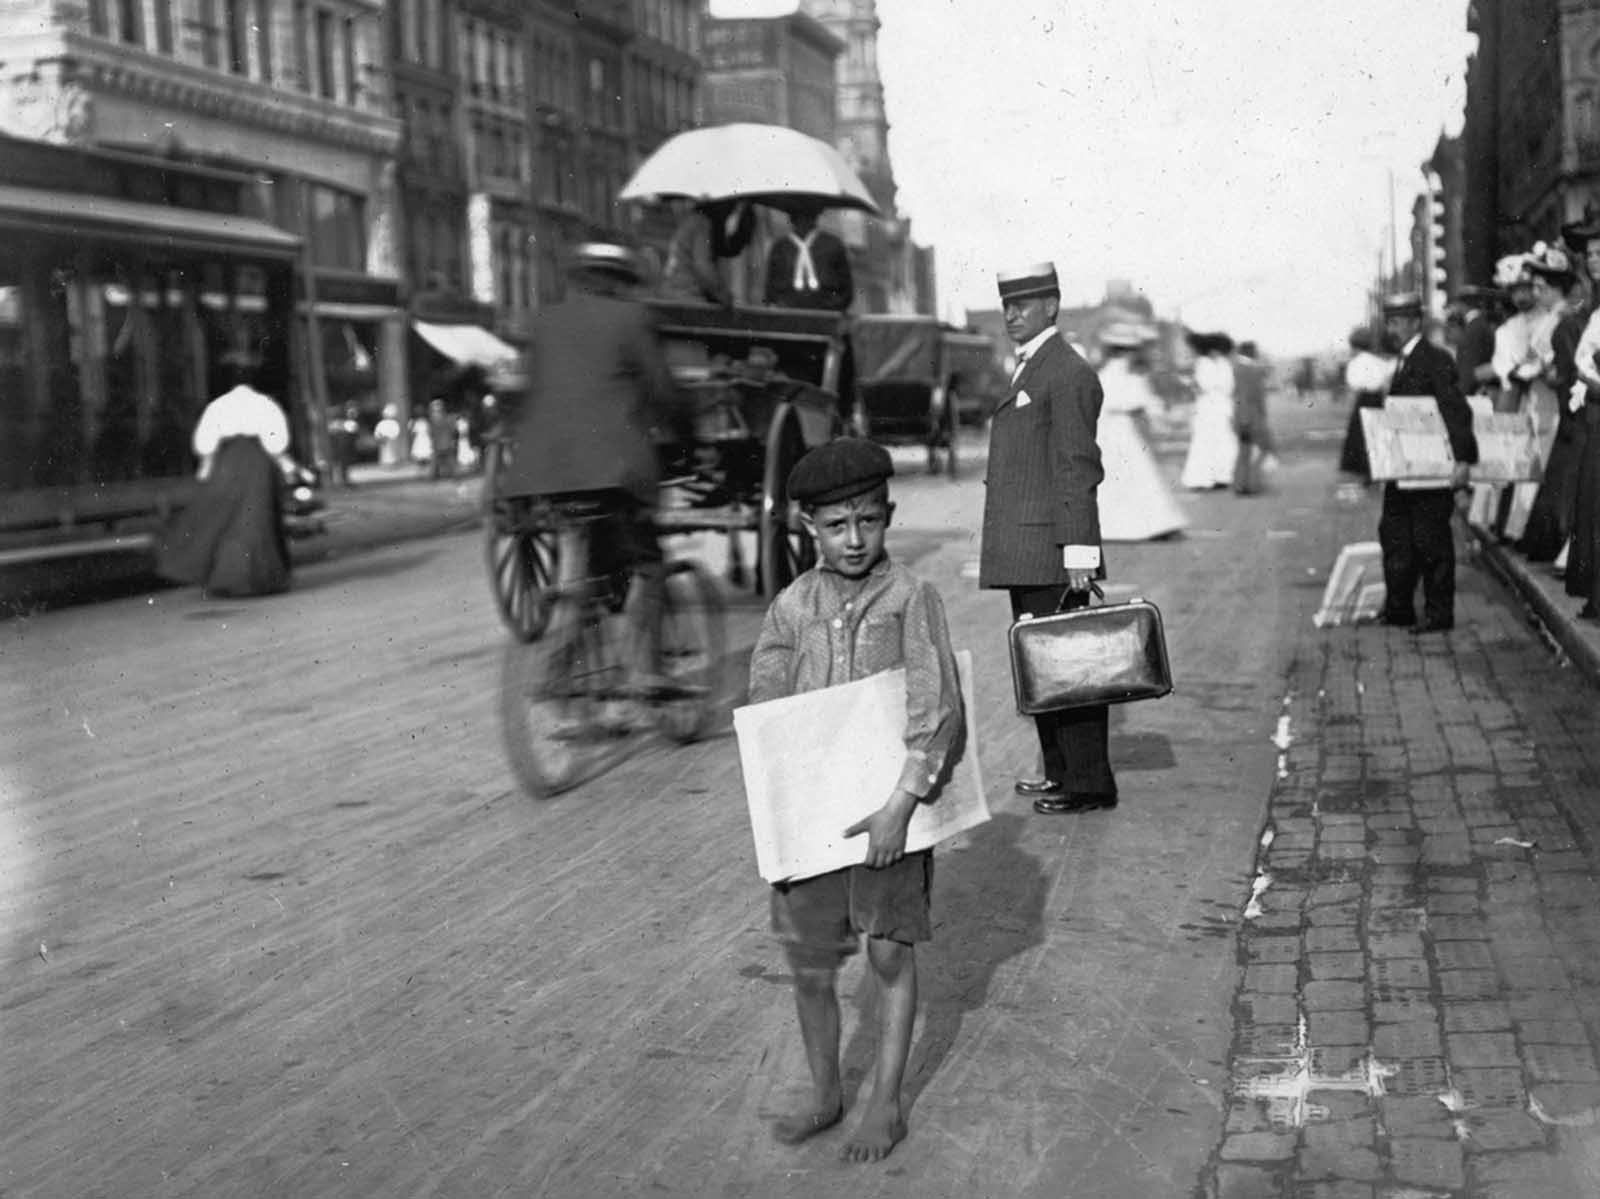 A barefoot Indianapolis newsie in August of 1908.